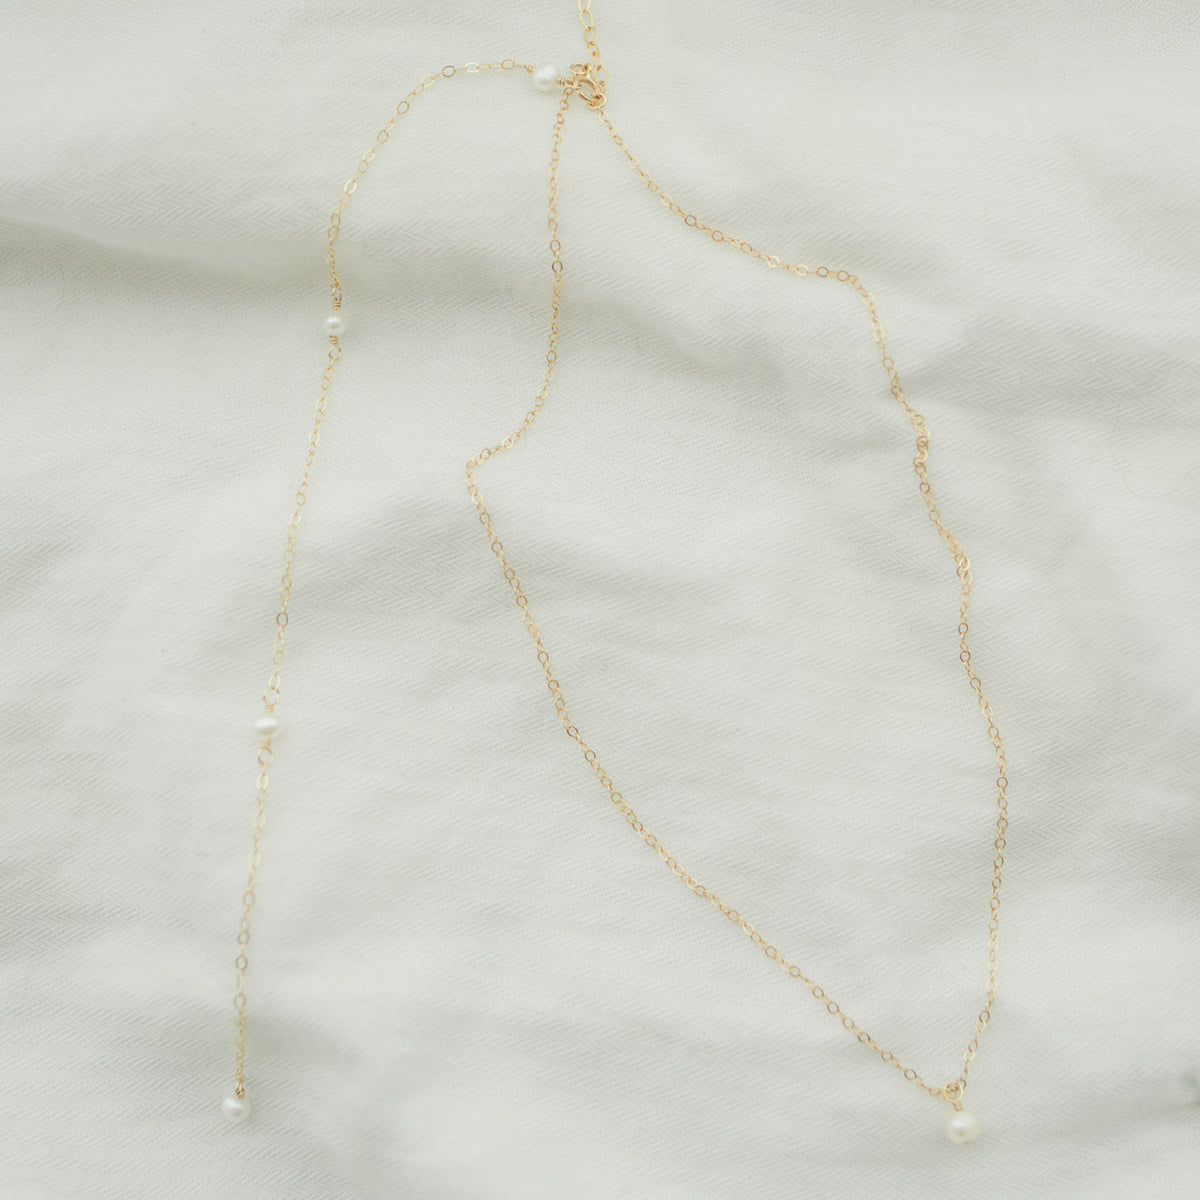 Dainty Pearl Back Necklace - Bridal Wedding Necklace for Open Low